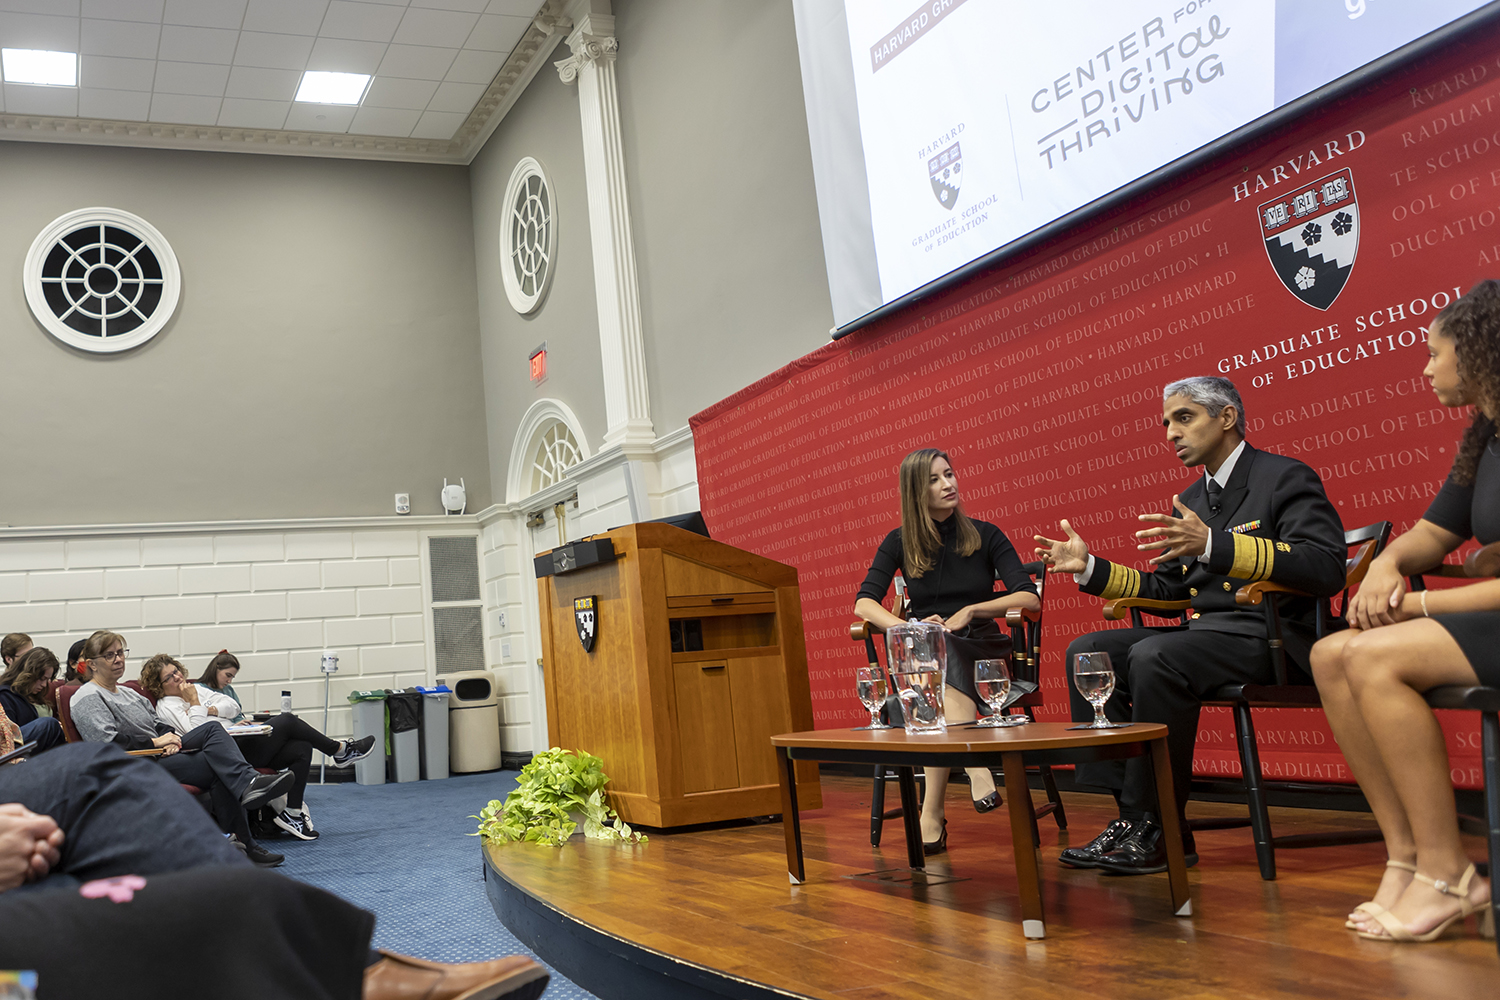 Center on Digital Thriving event with Vivek Murthy